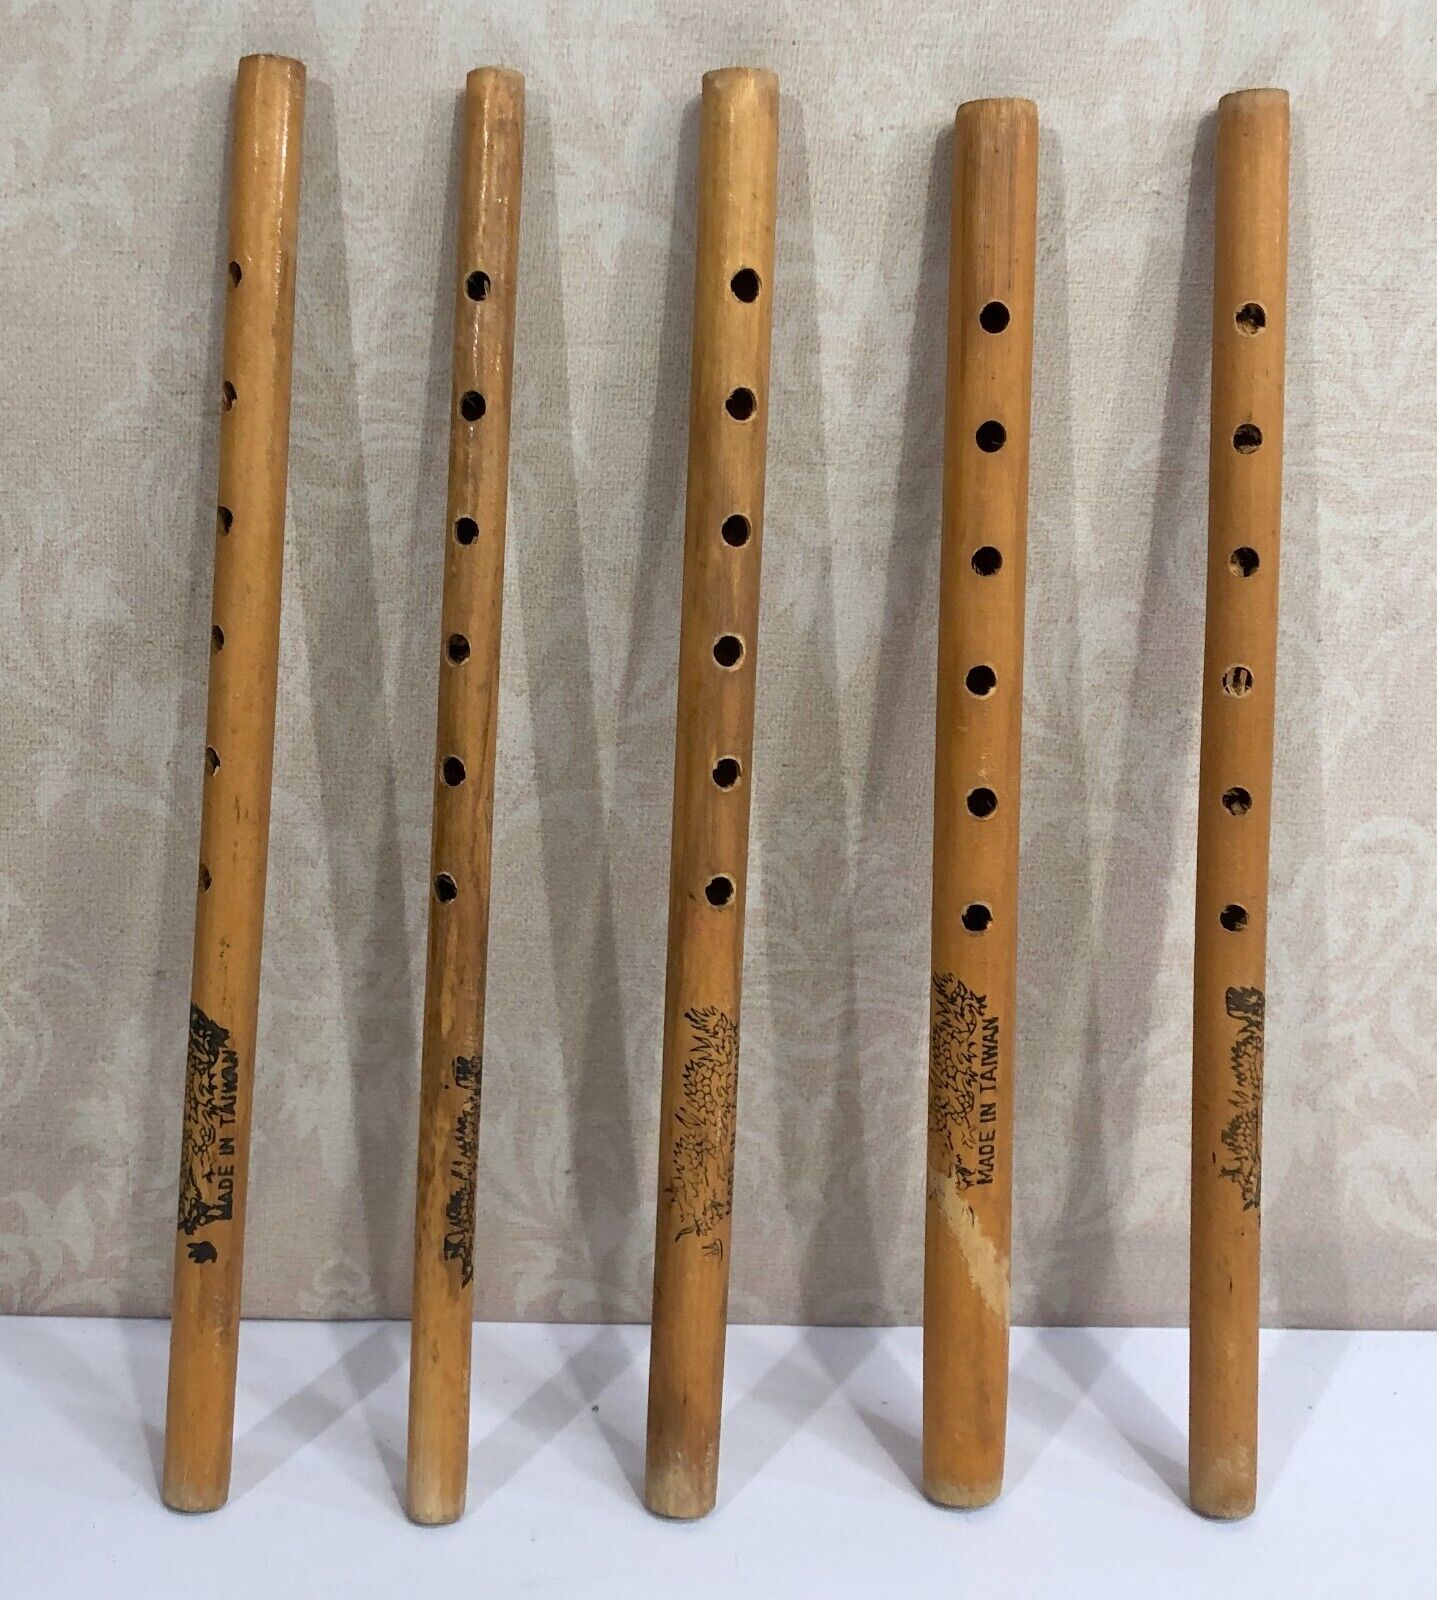 Wooden Bamboo Flutes Pipes Handmade Taiwan Five Different Cultural Ethnic